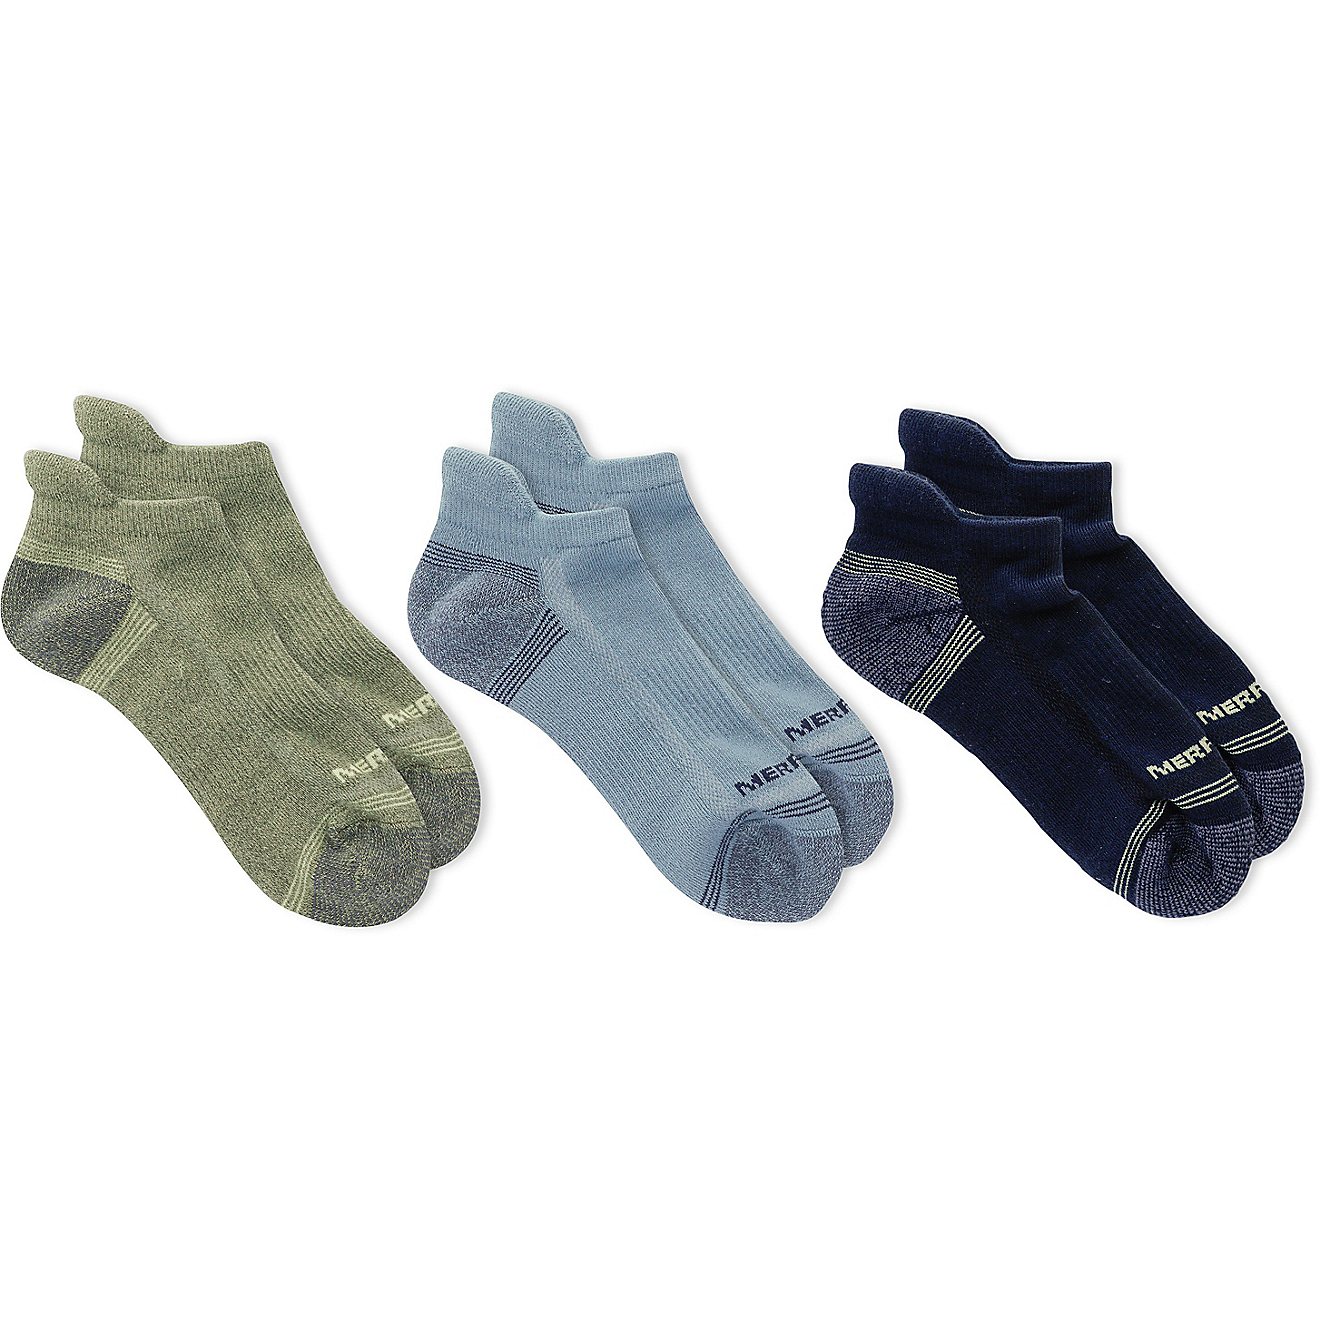 Merrell Nature's Gym Repreve Hiking Low-Cut Socks 3 Pack | Academy